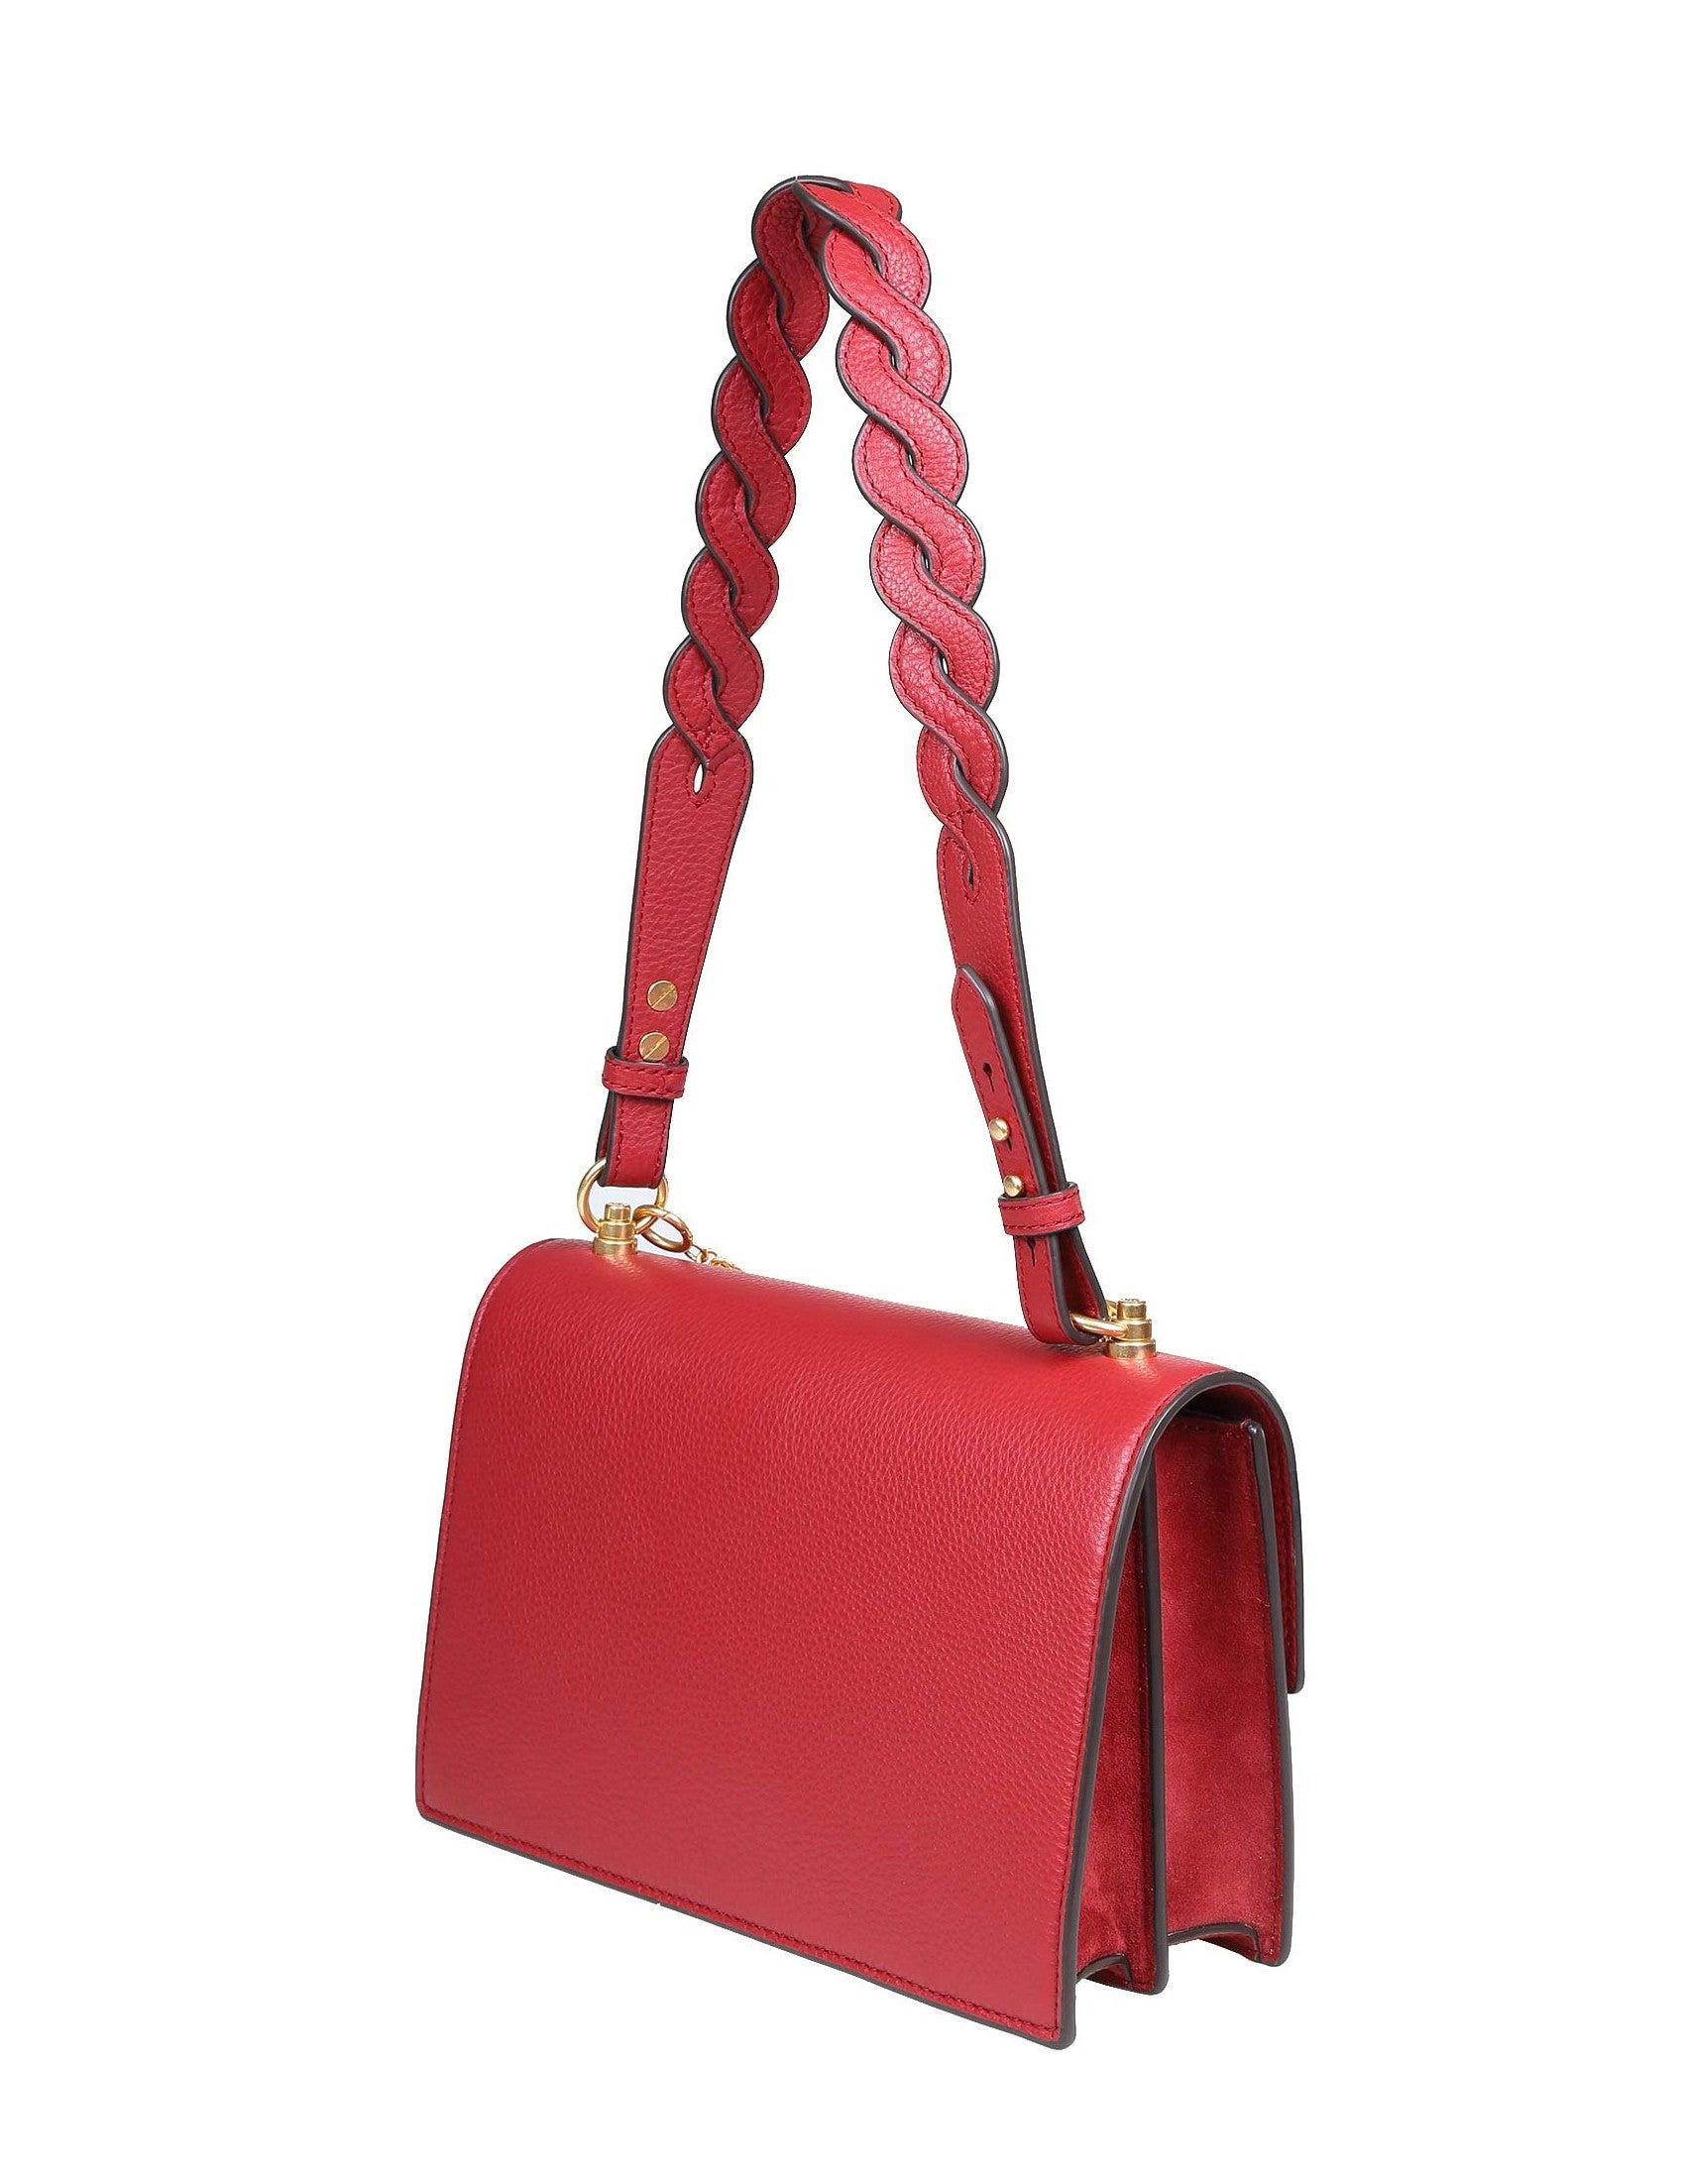 Tory Burch Miller Shoulder Bag In Leather in Red | Lyst